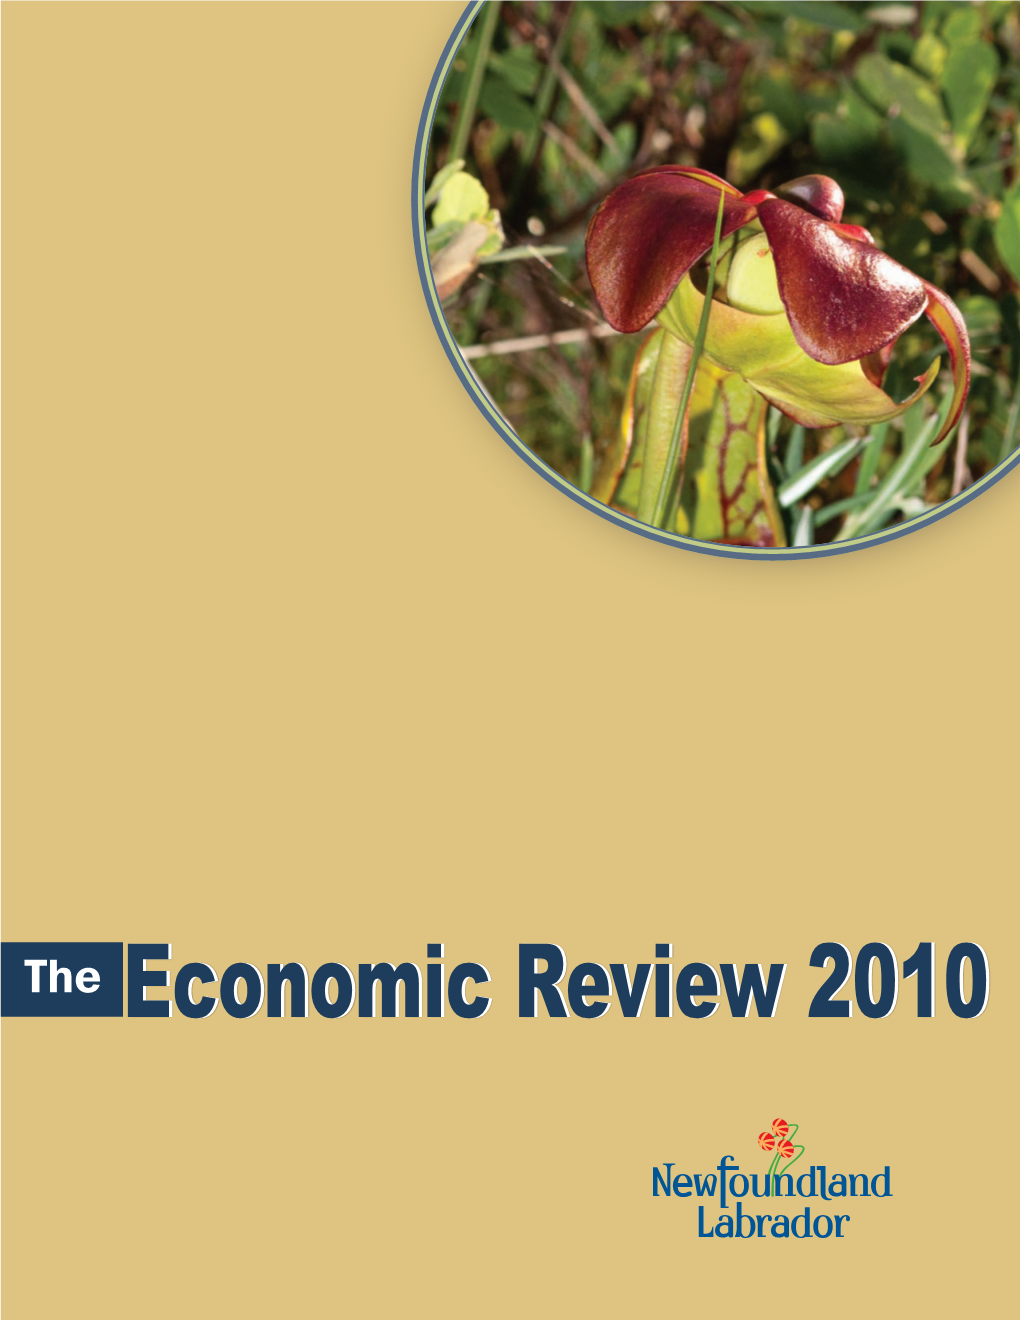 Economic Review 2010 Should Be Directed To: Global Economic Environment